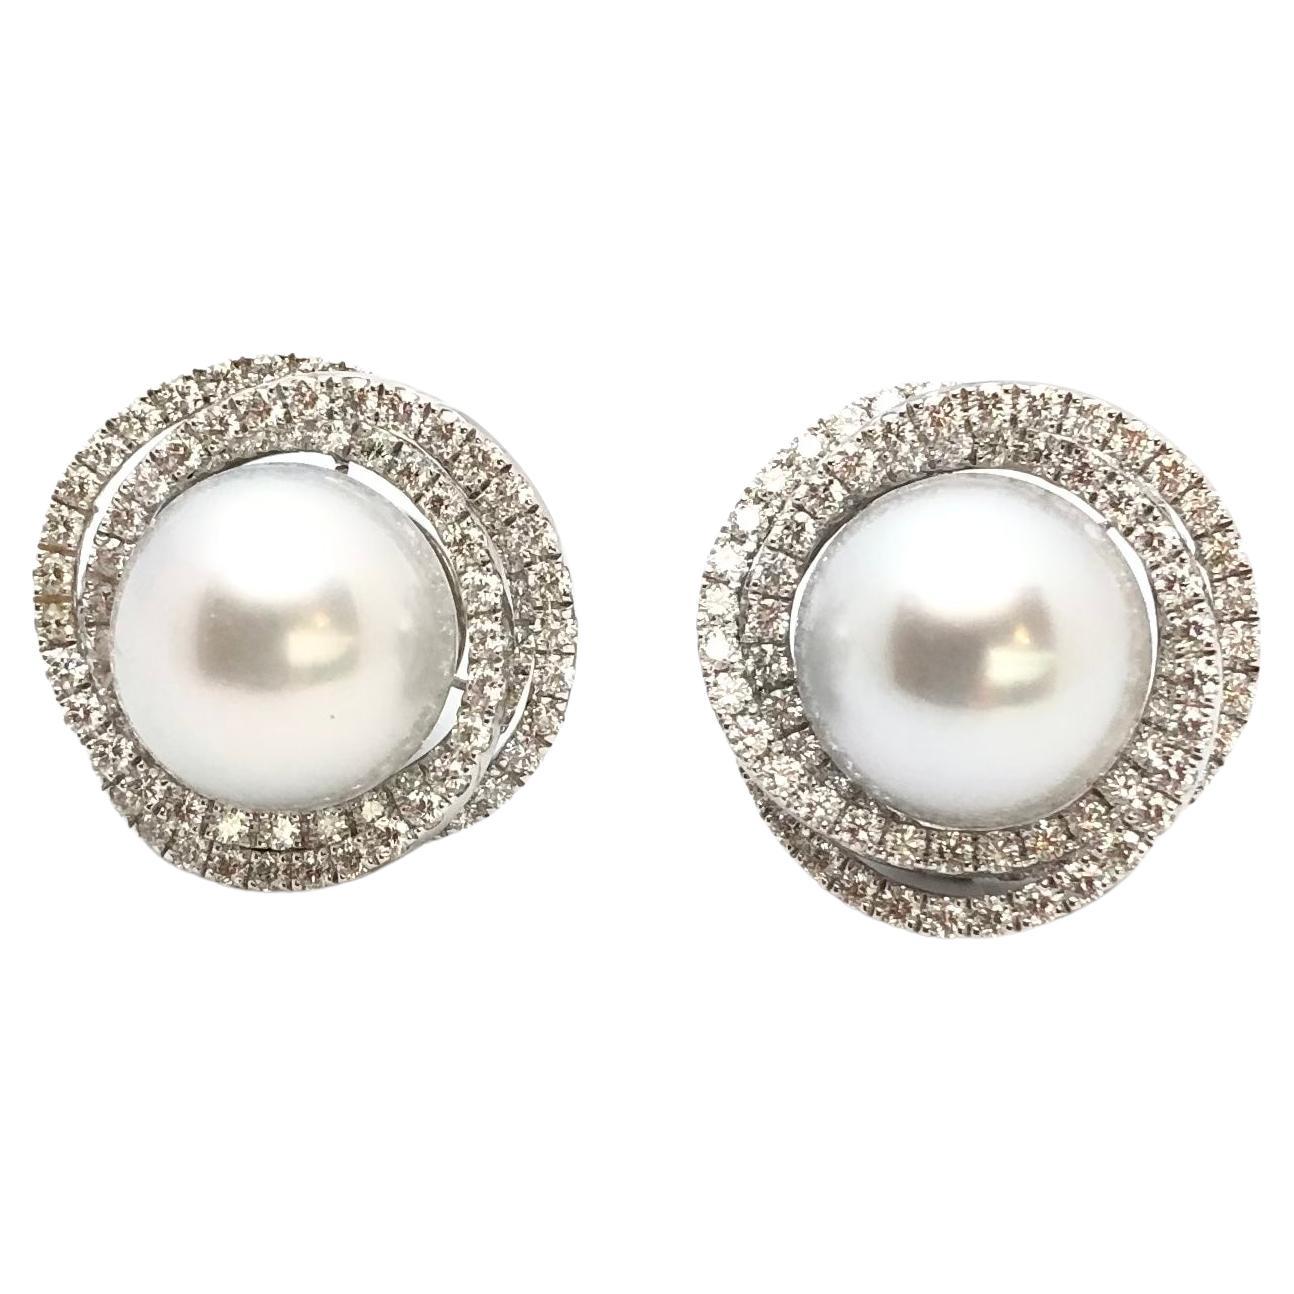 South Sea Pearl with Diamond 2.69 carats Earrings set in 18 Karat White Gold Settings

Width:   2.20 cm 
Length:  2.20 cm
Total Weight: 18.55 grams

South Sea Pearl: 13 mm

